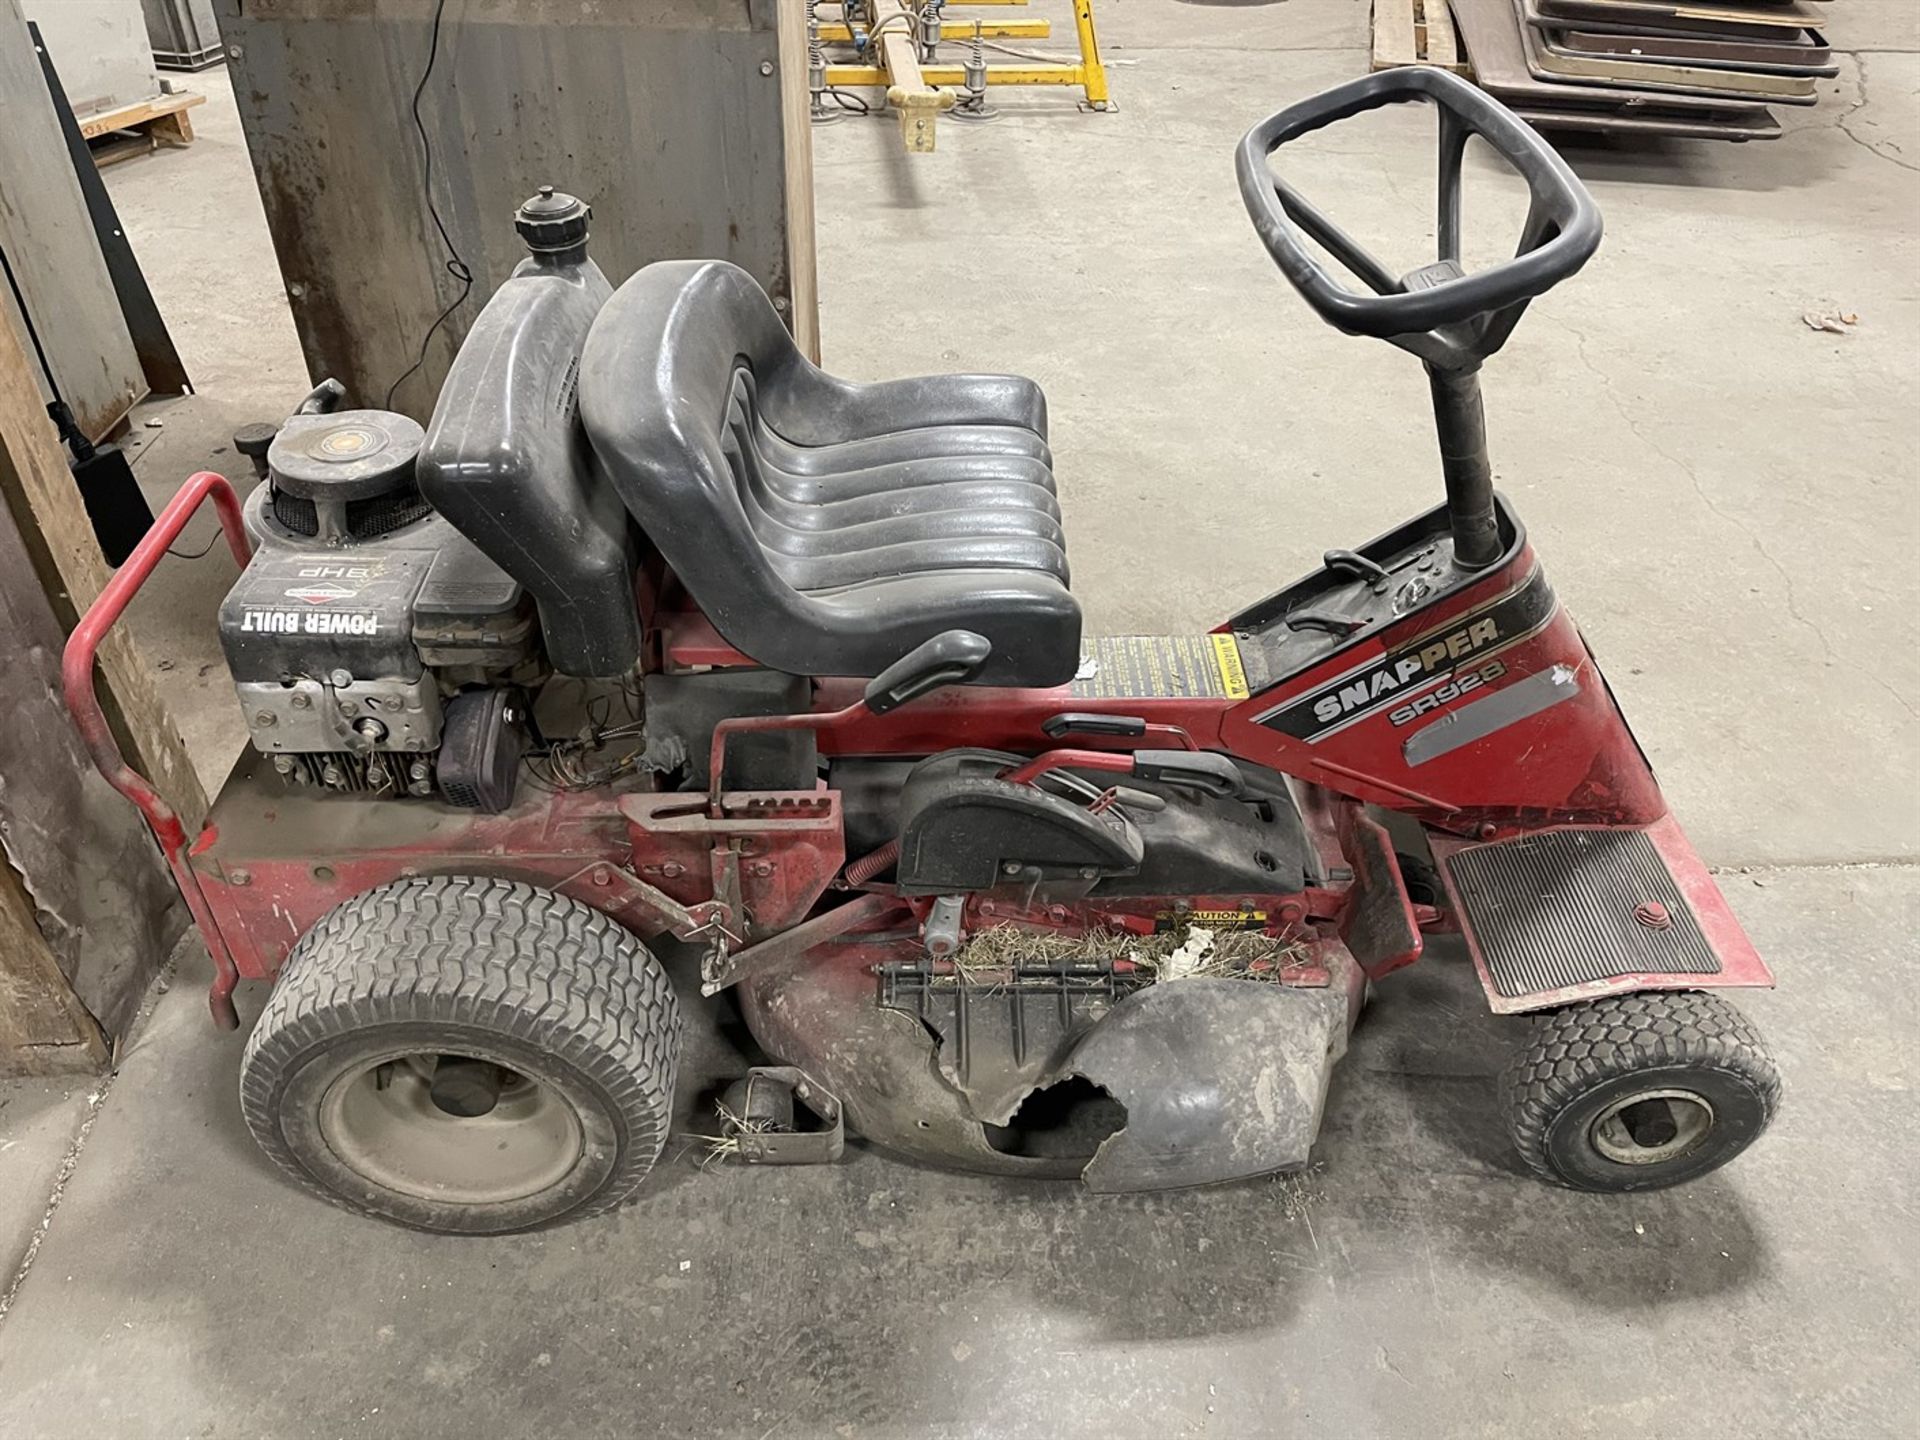 Snapper SR928 Riding Lawn Mower, 8 HP Briggs & Stratton Engine, 28" Capacity - Image 2 of 8